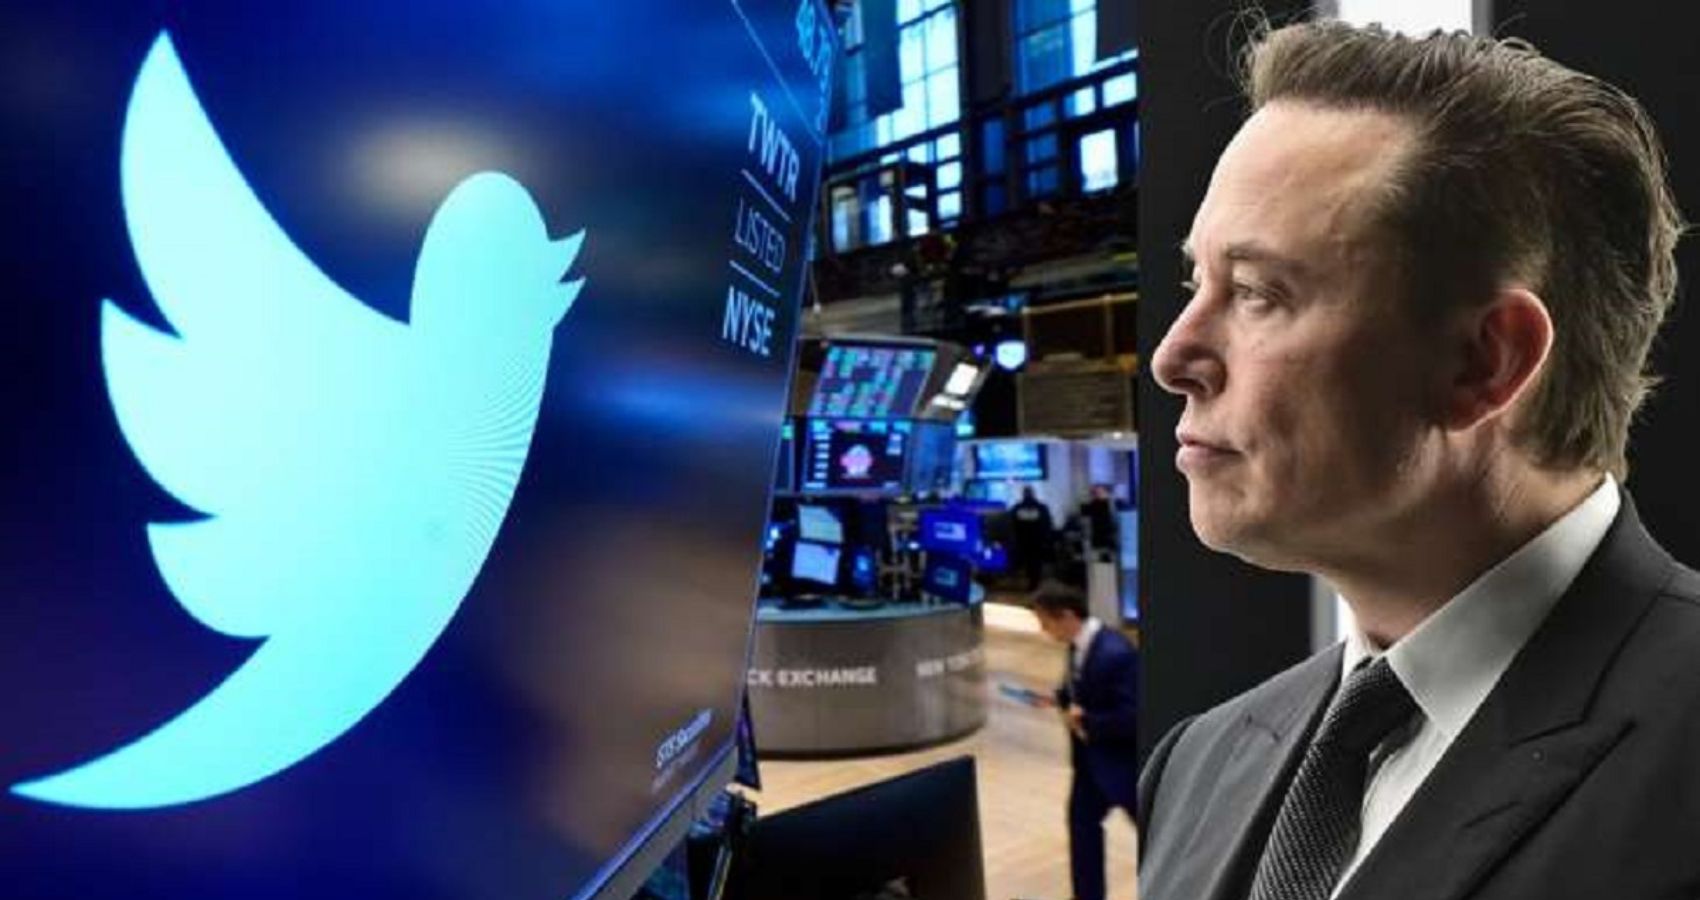 Elon Musk Likely To Strike Deal For $54.20 Per Share To Acquire Twitter